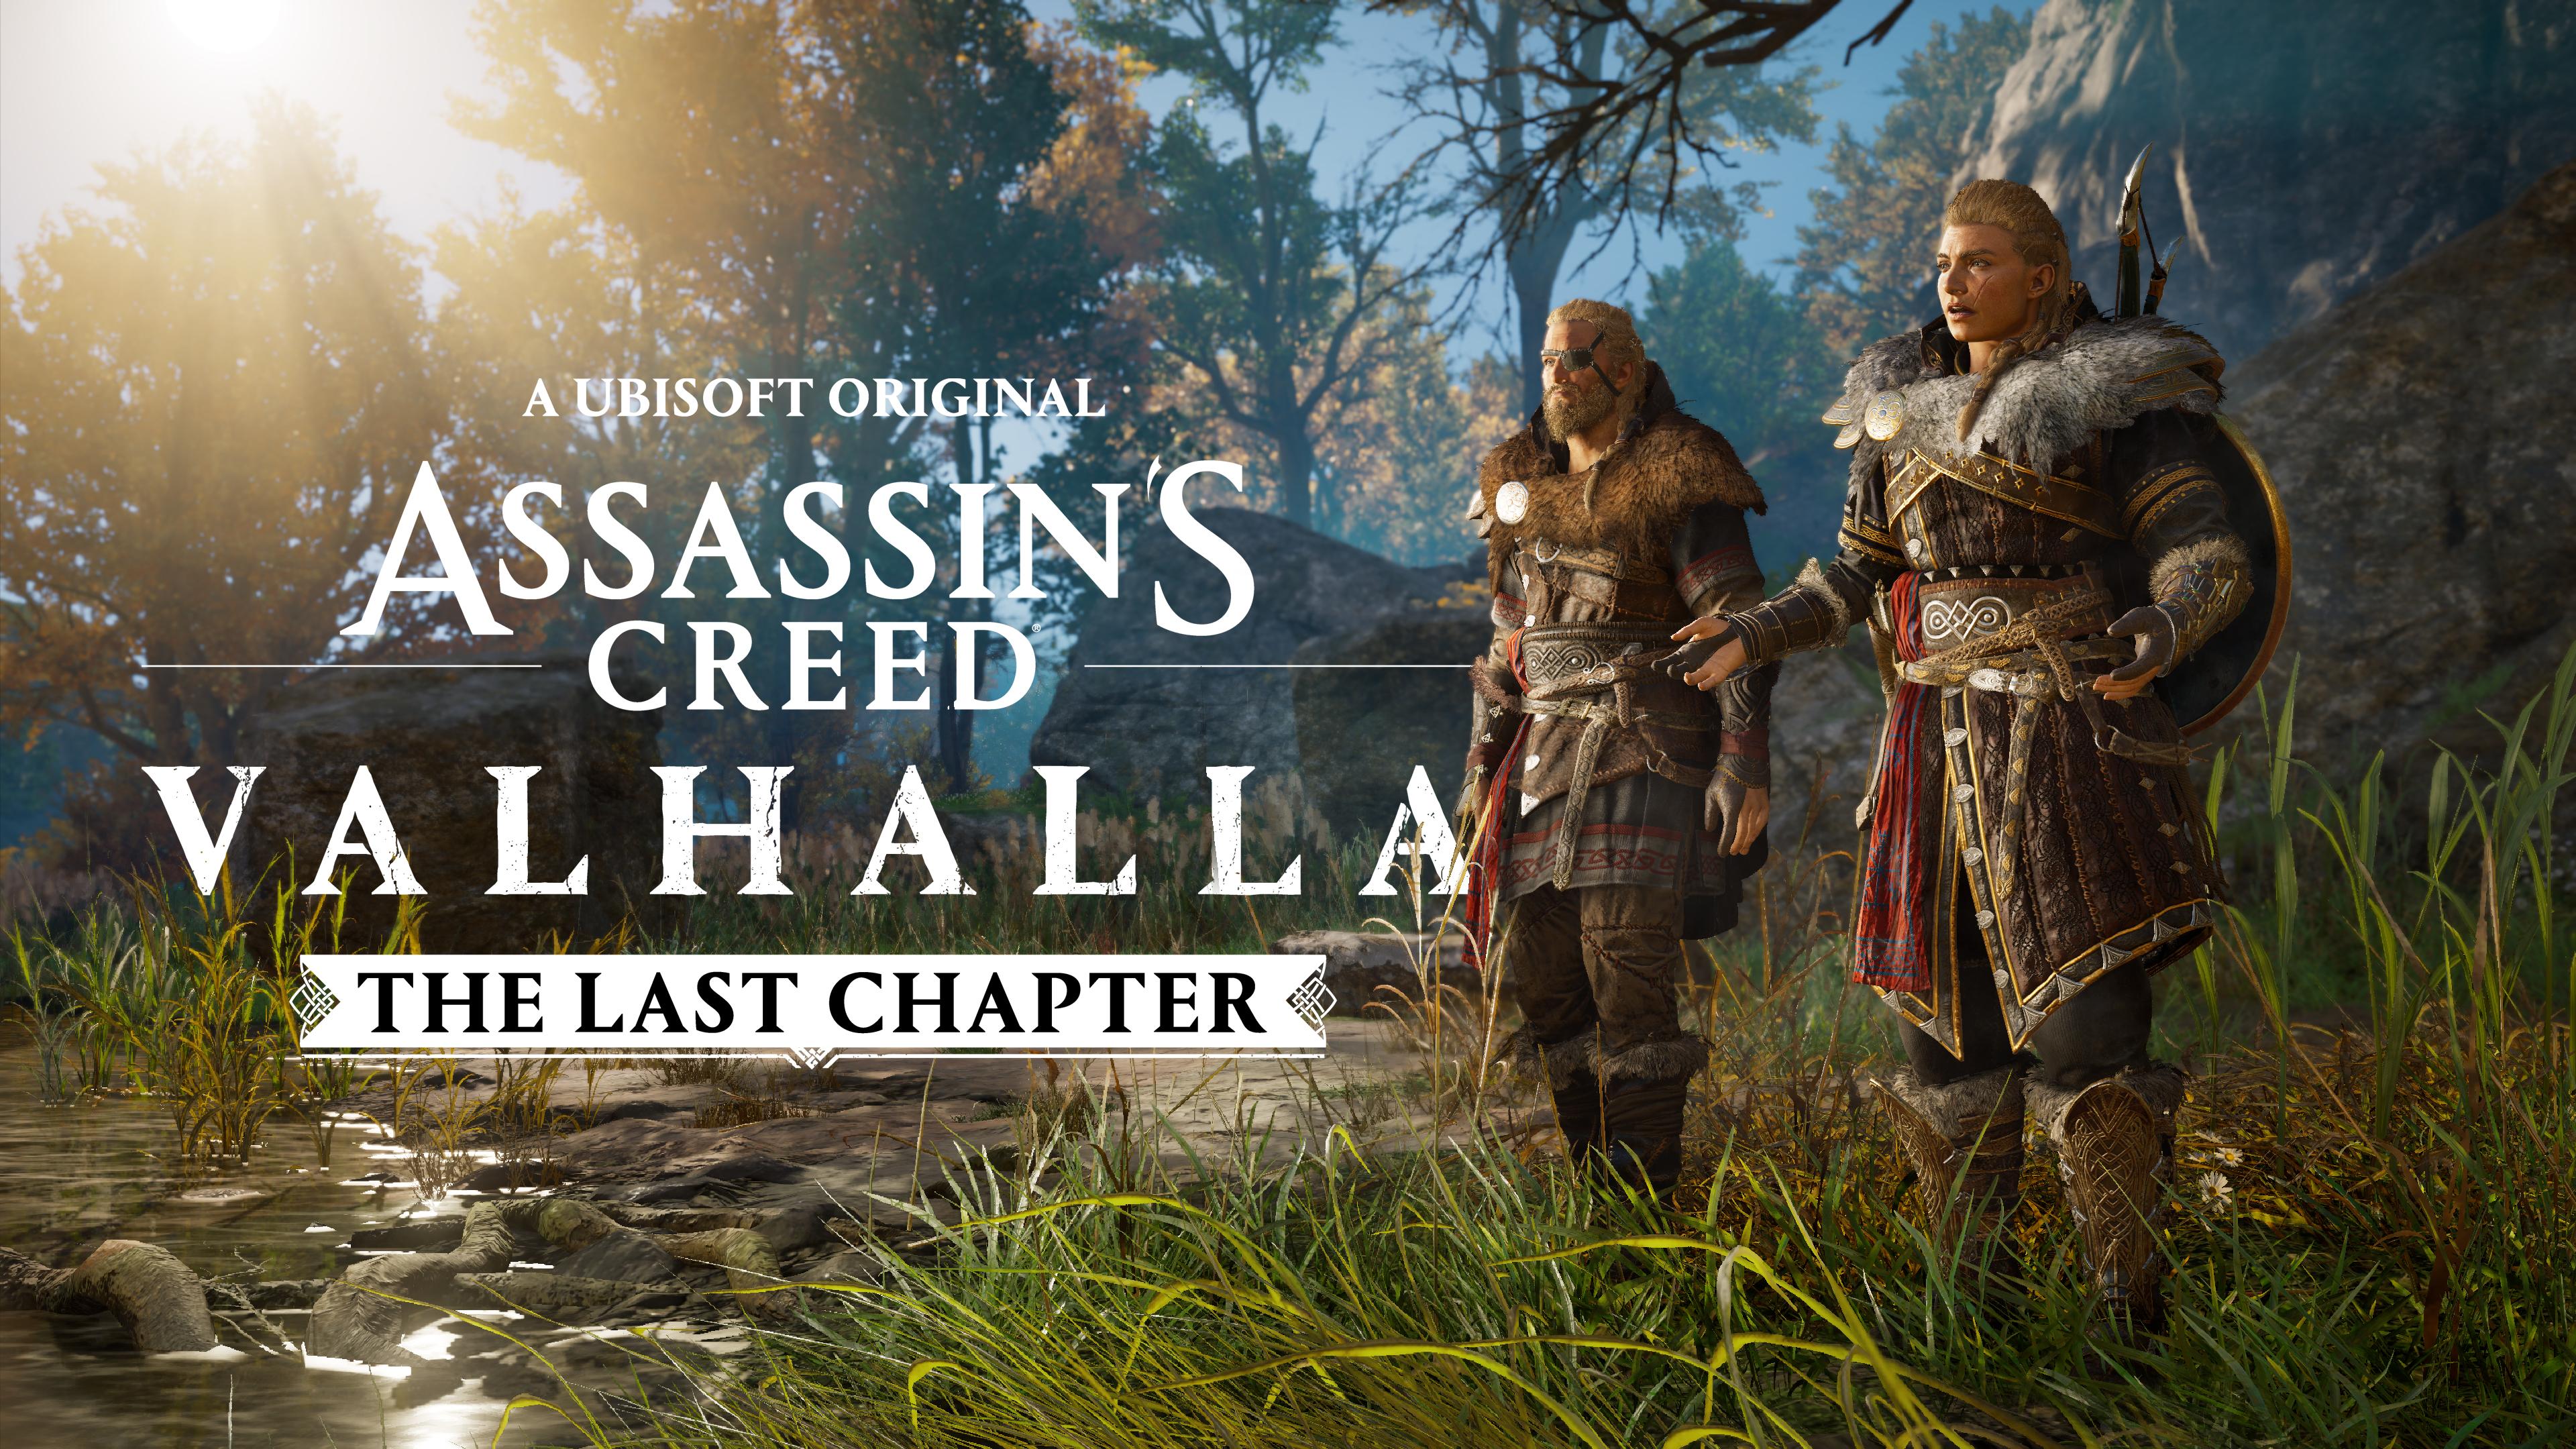 Assassin's Creed on X: ❗📢 Due to an unforeseen glitch in the Animus, the  final content update for Assassin's Creed Valhalla has arrived early in  Ravensthorpe. ❗ We hope you enjoy The